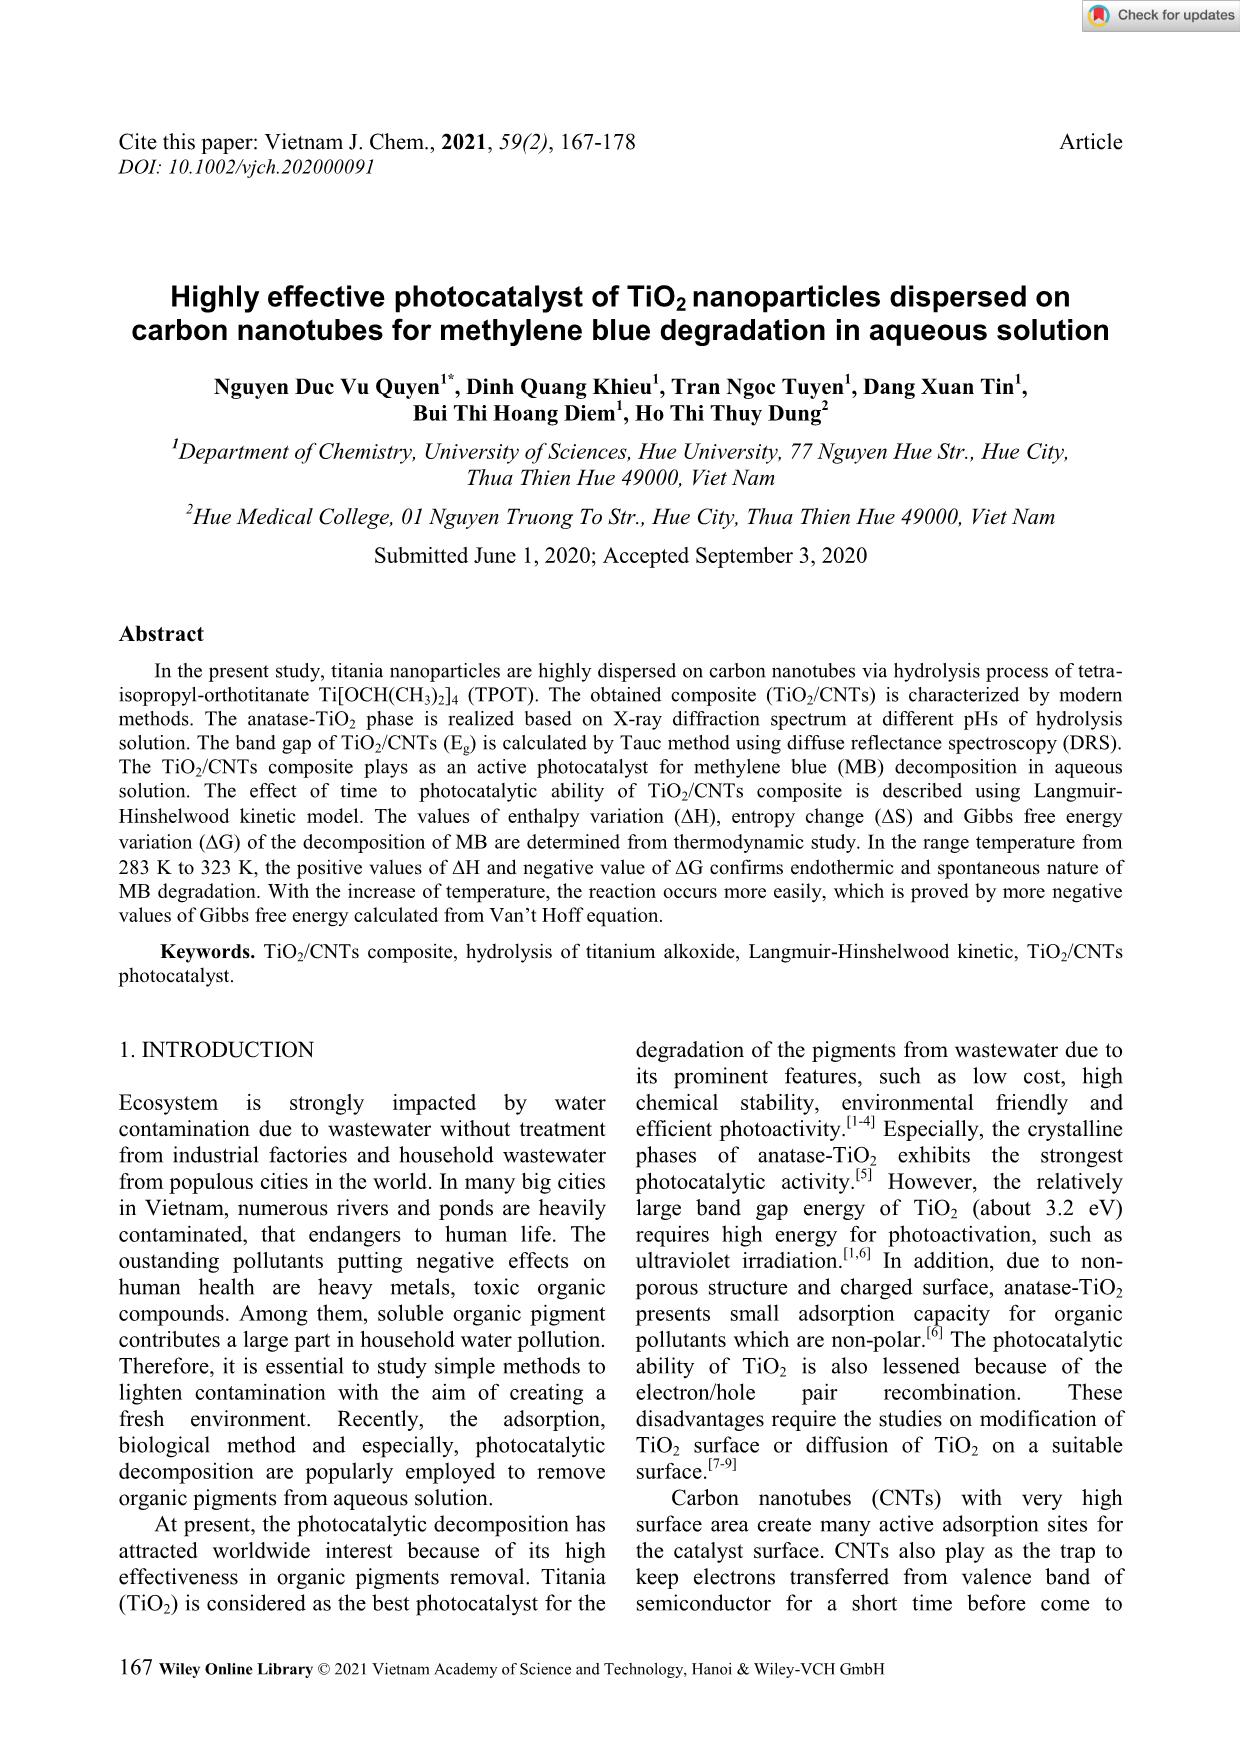 Highly effective photocatalyst of TiO2 nanoparticles dispersed on carbon nanotubes for methylene blue degradation in aqueous solution trang 1